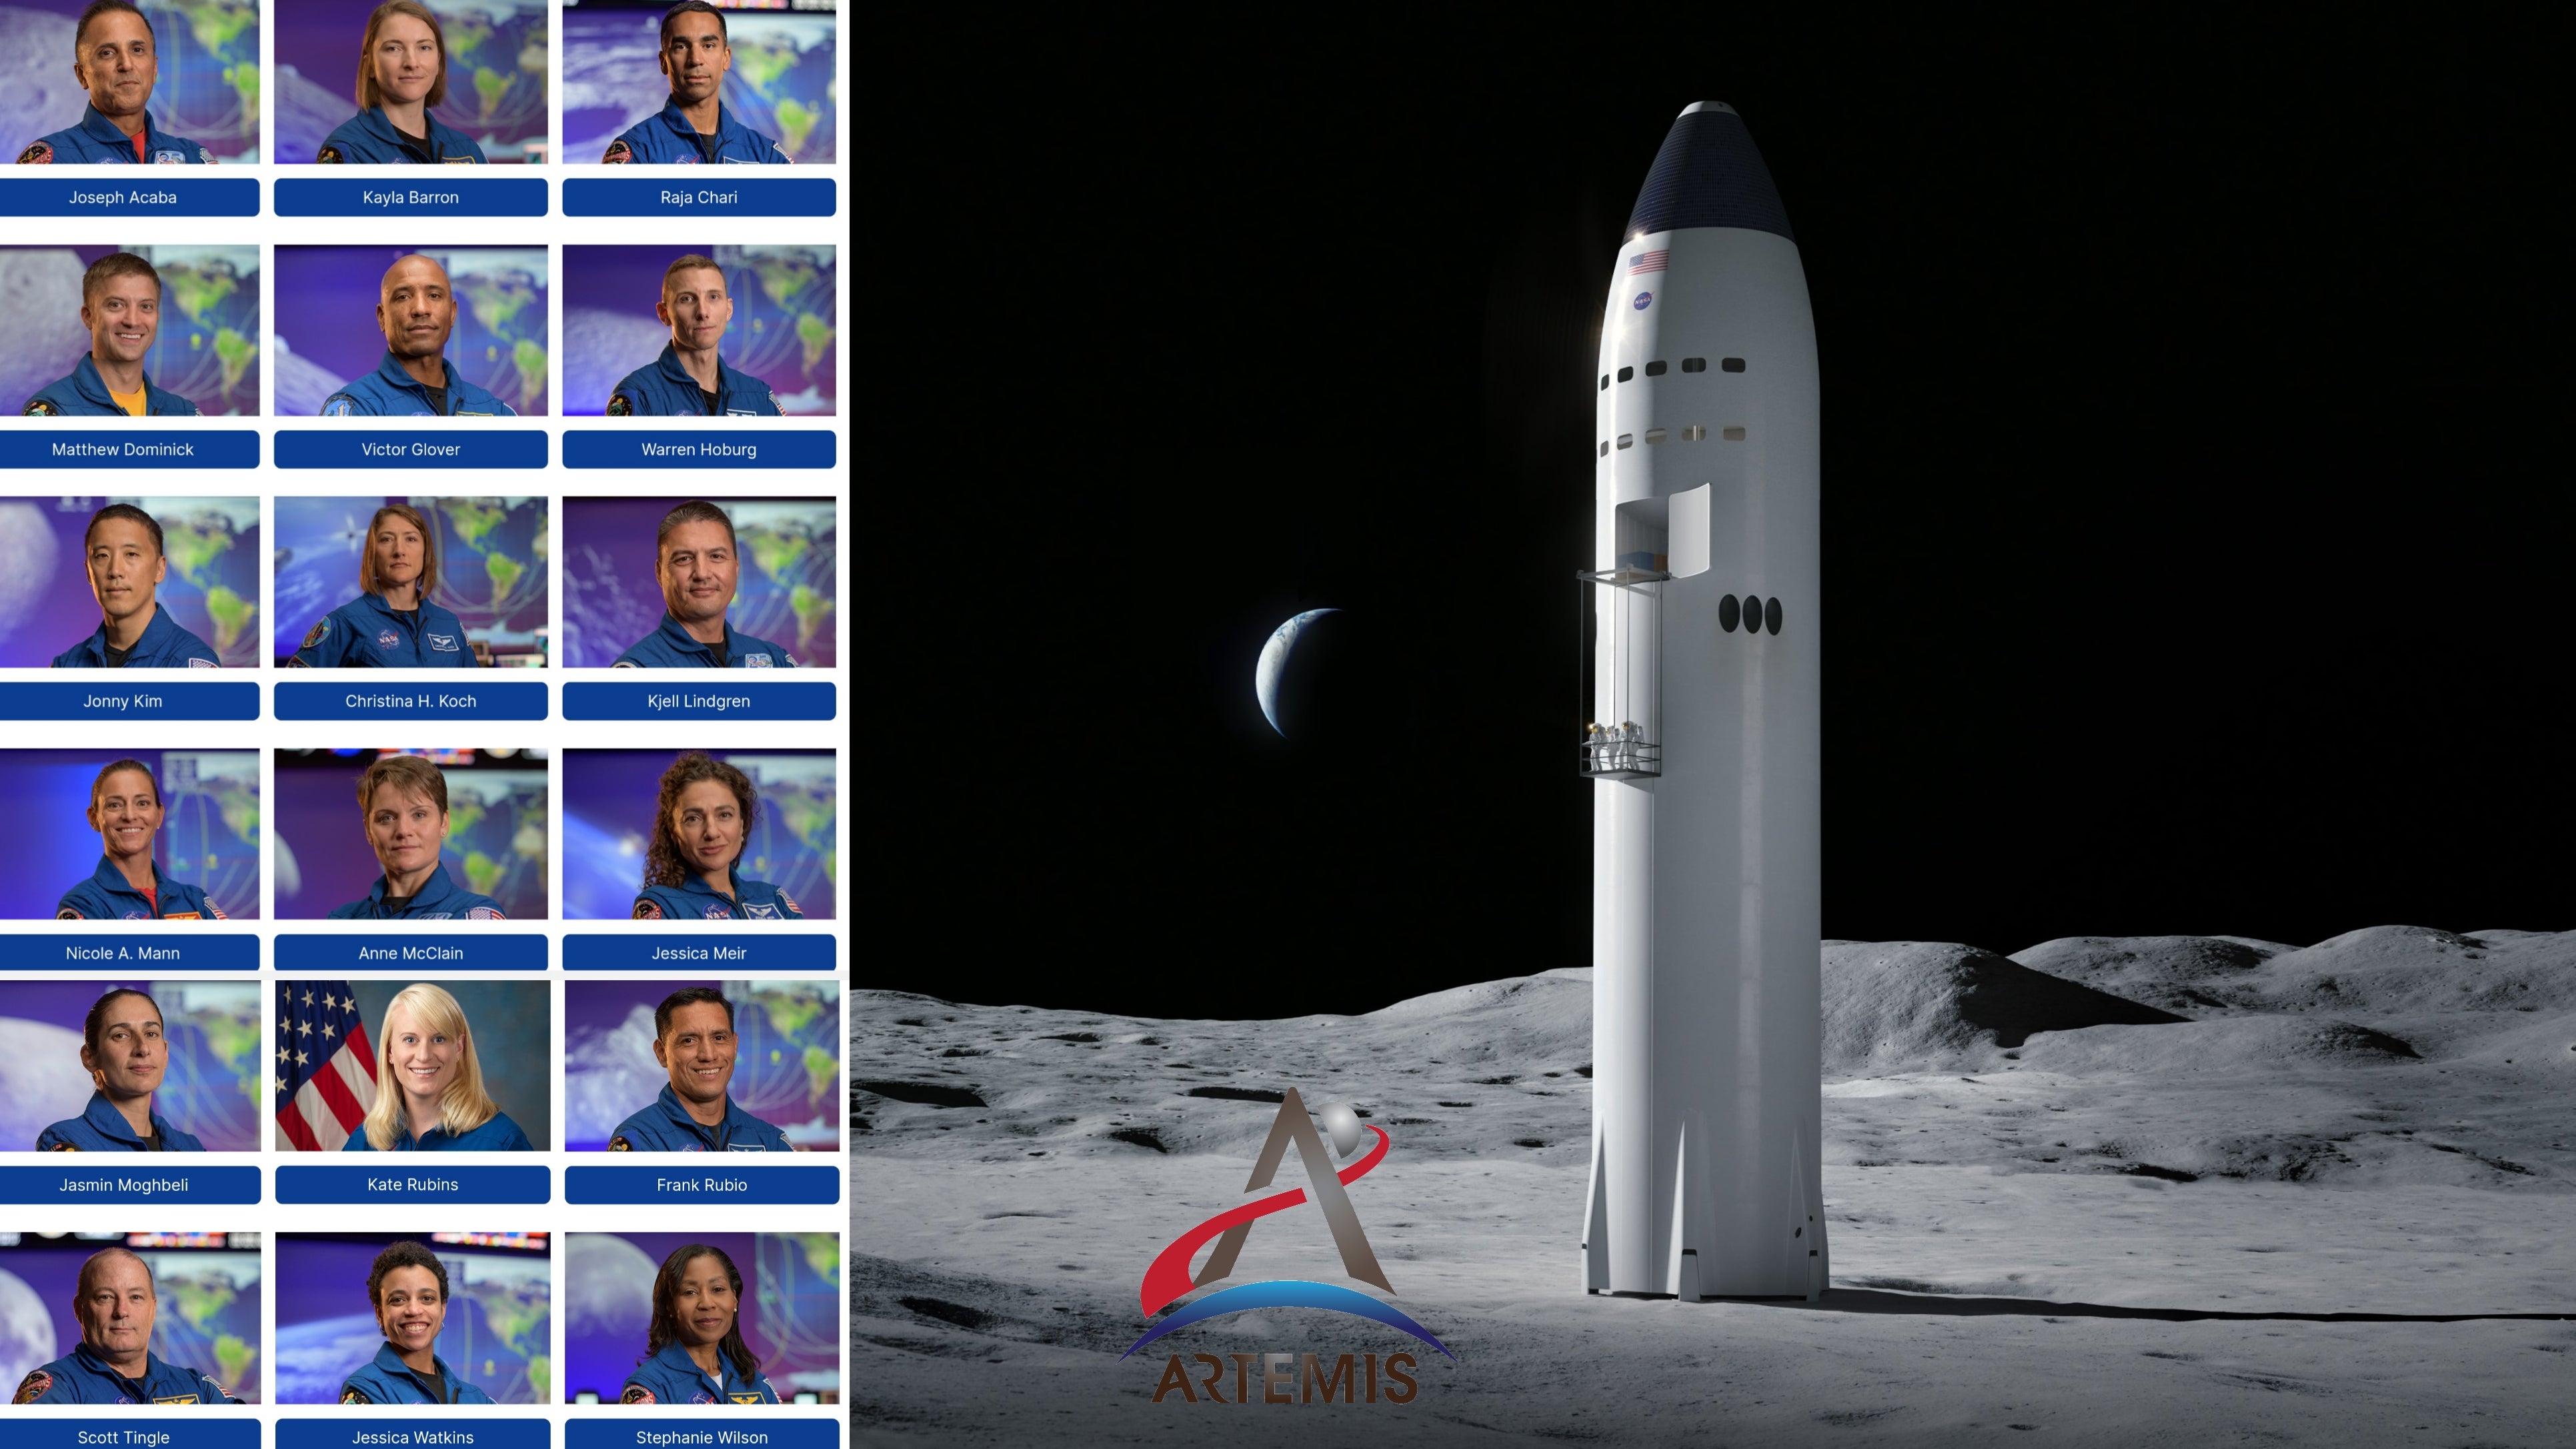 NASA Artemis Astronauts could land on the Lunar surface aboard SpaceX’s Starship one day